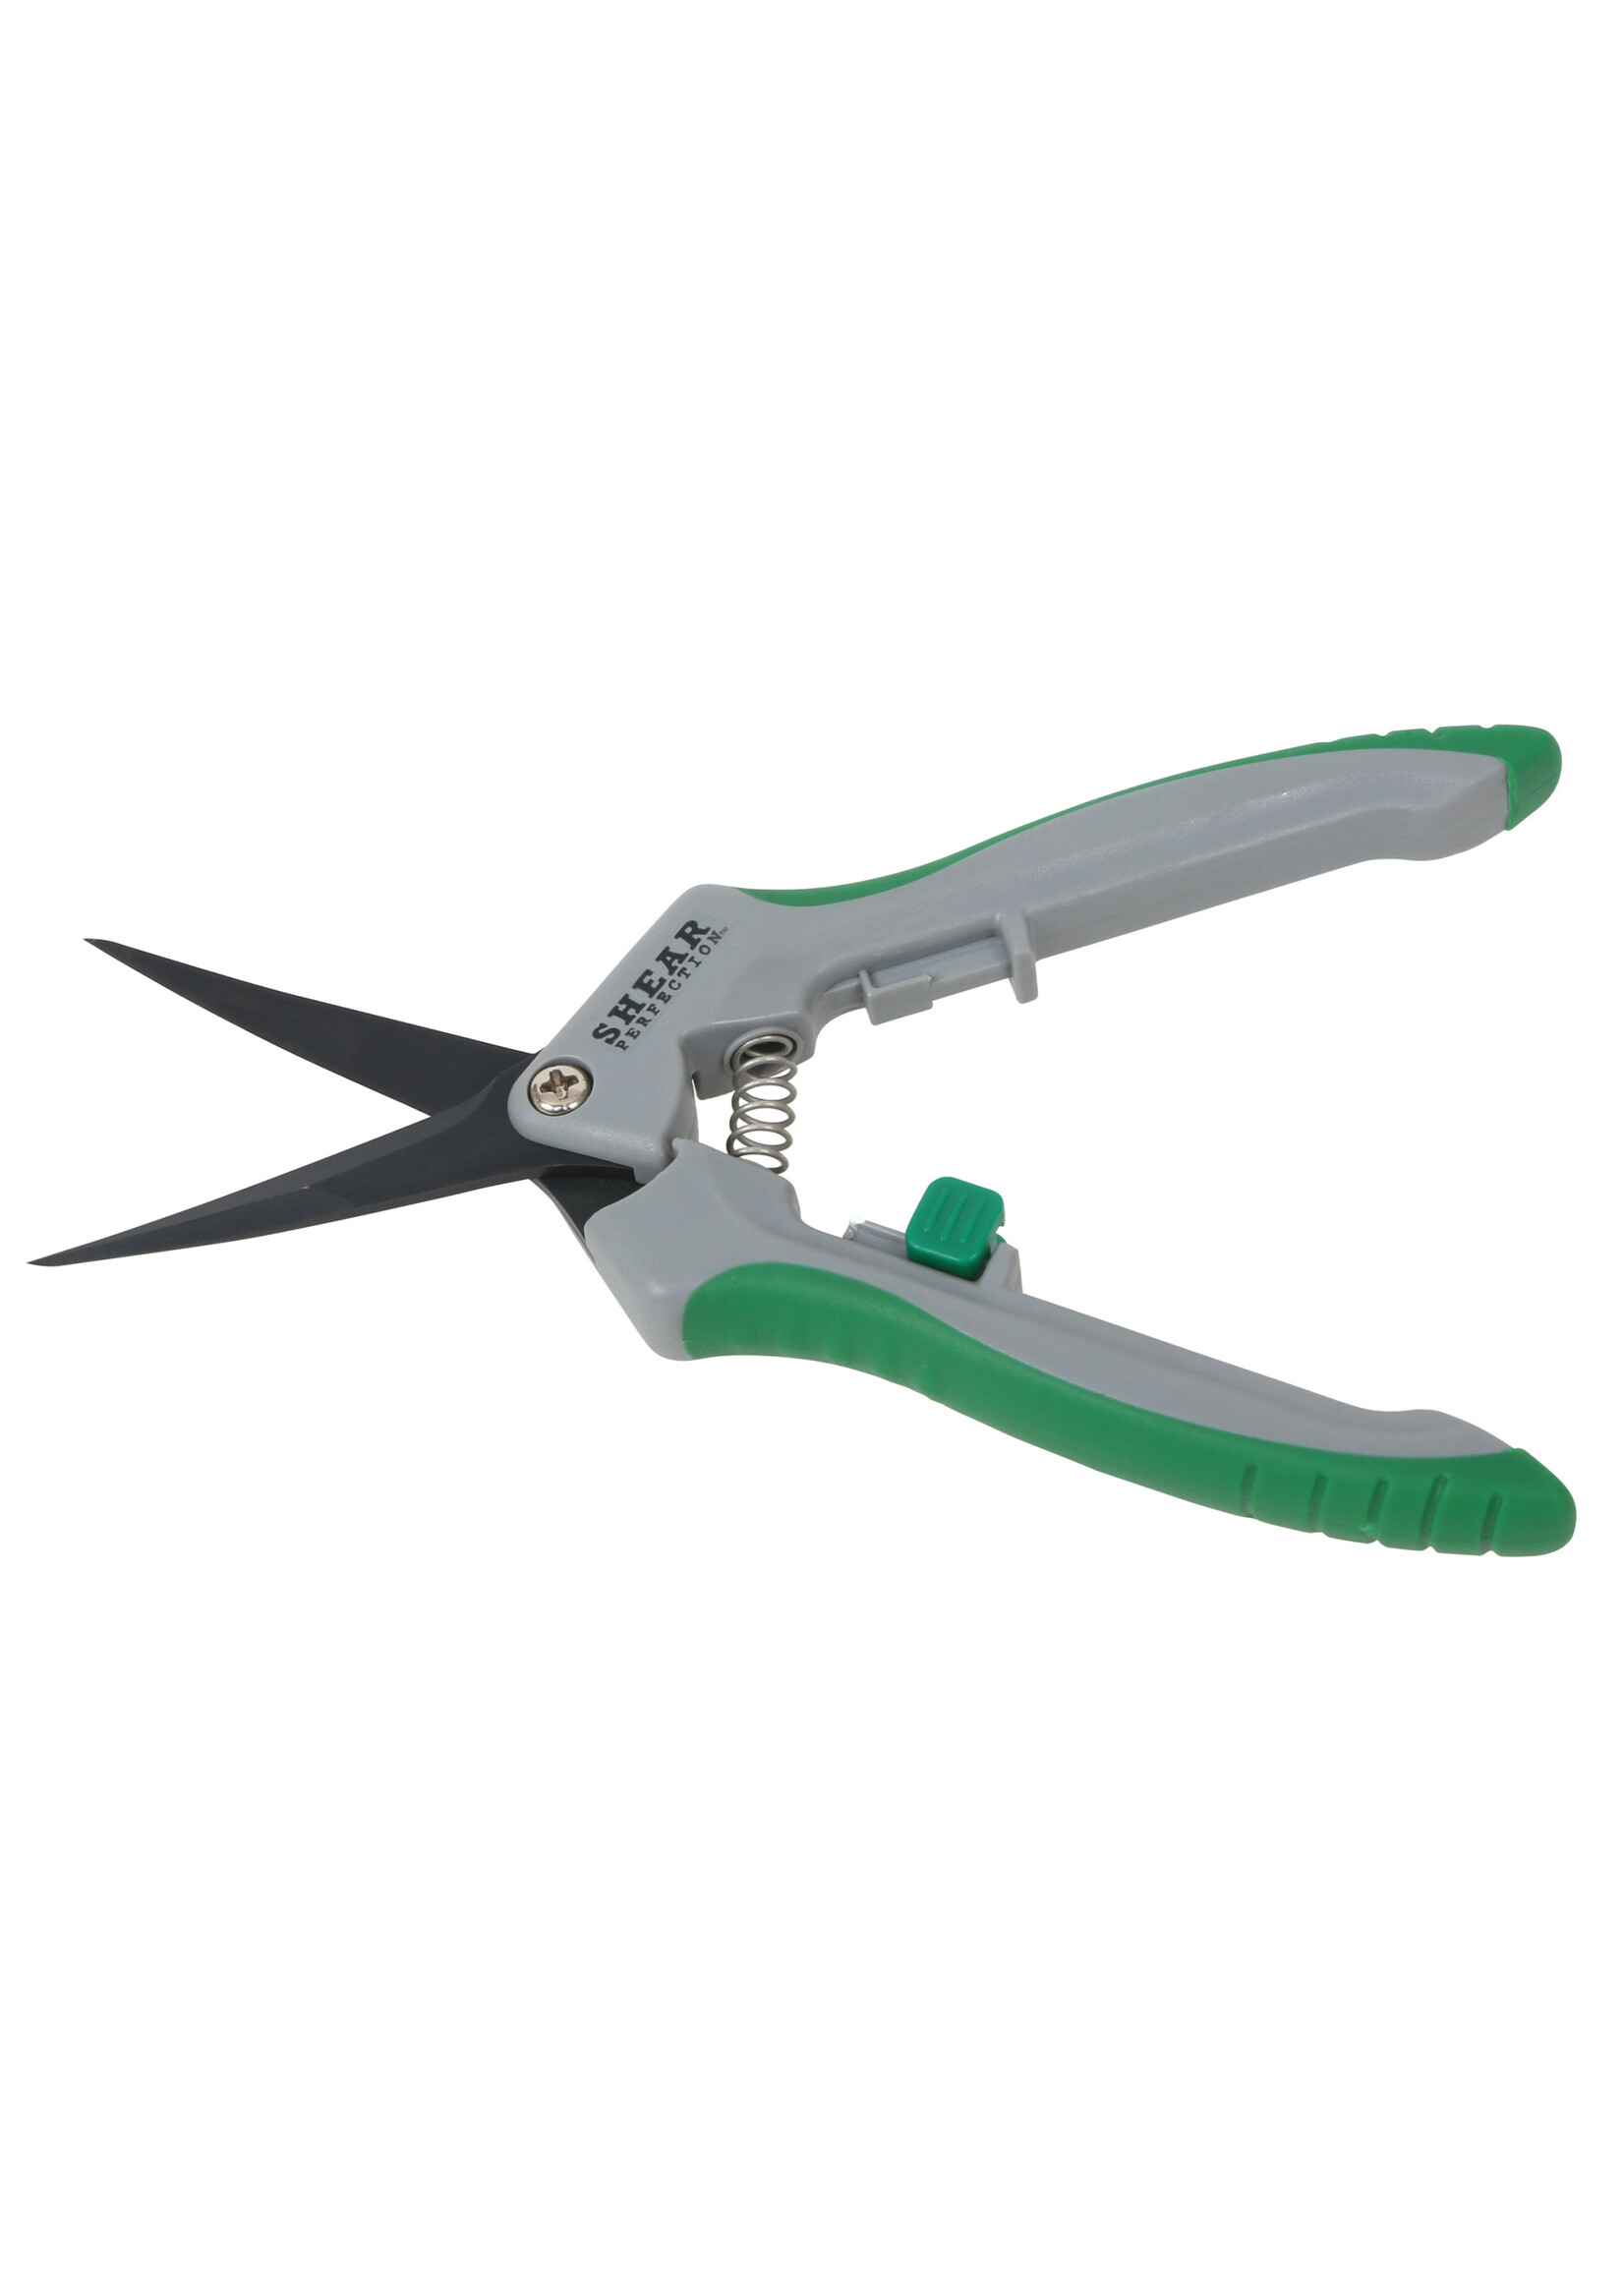 Shear Perfection Shear Perfection Platinum Trimming Shear - 2 in Curved Non-Stick Blades (12/Cs)